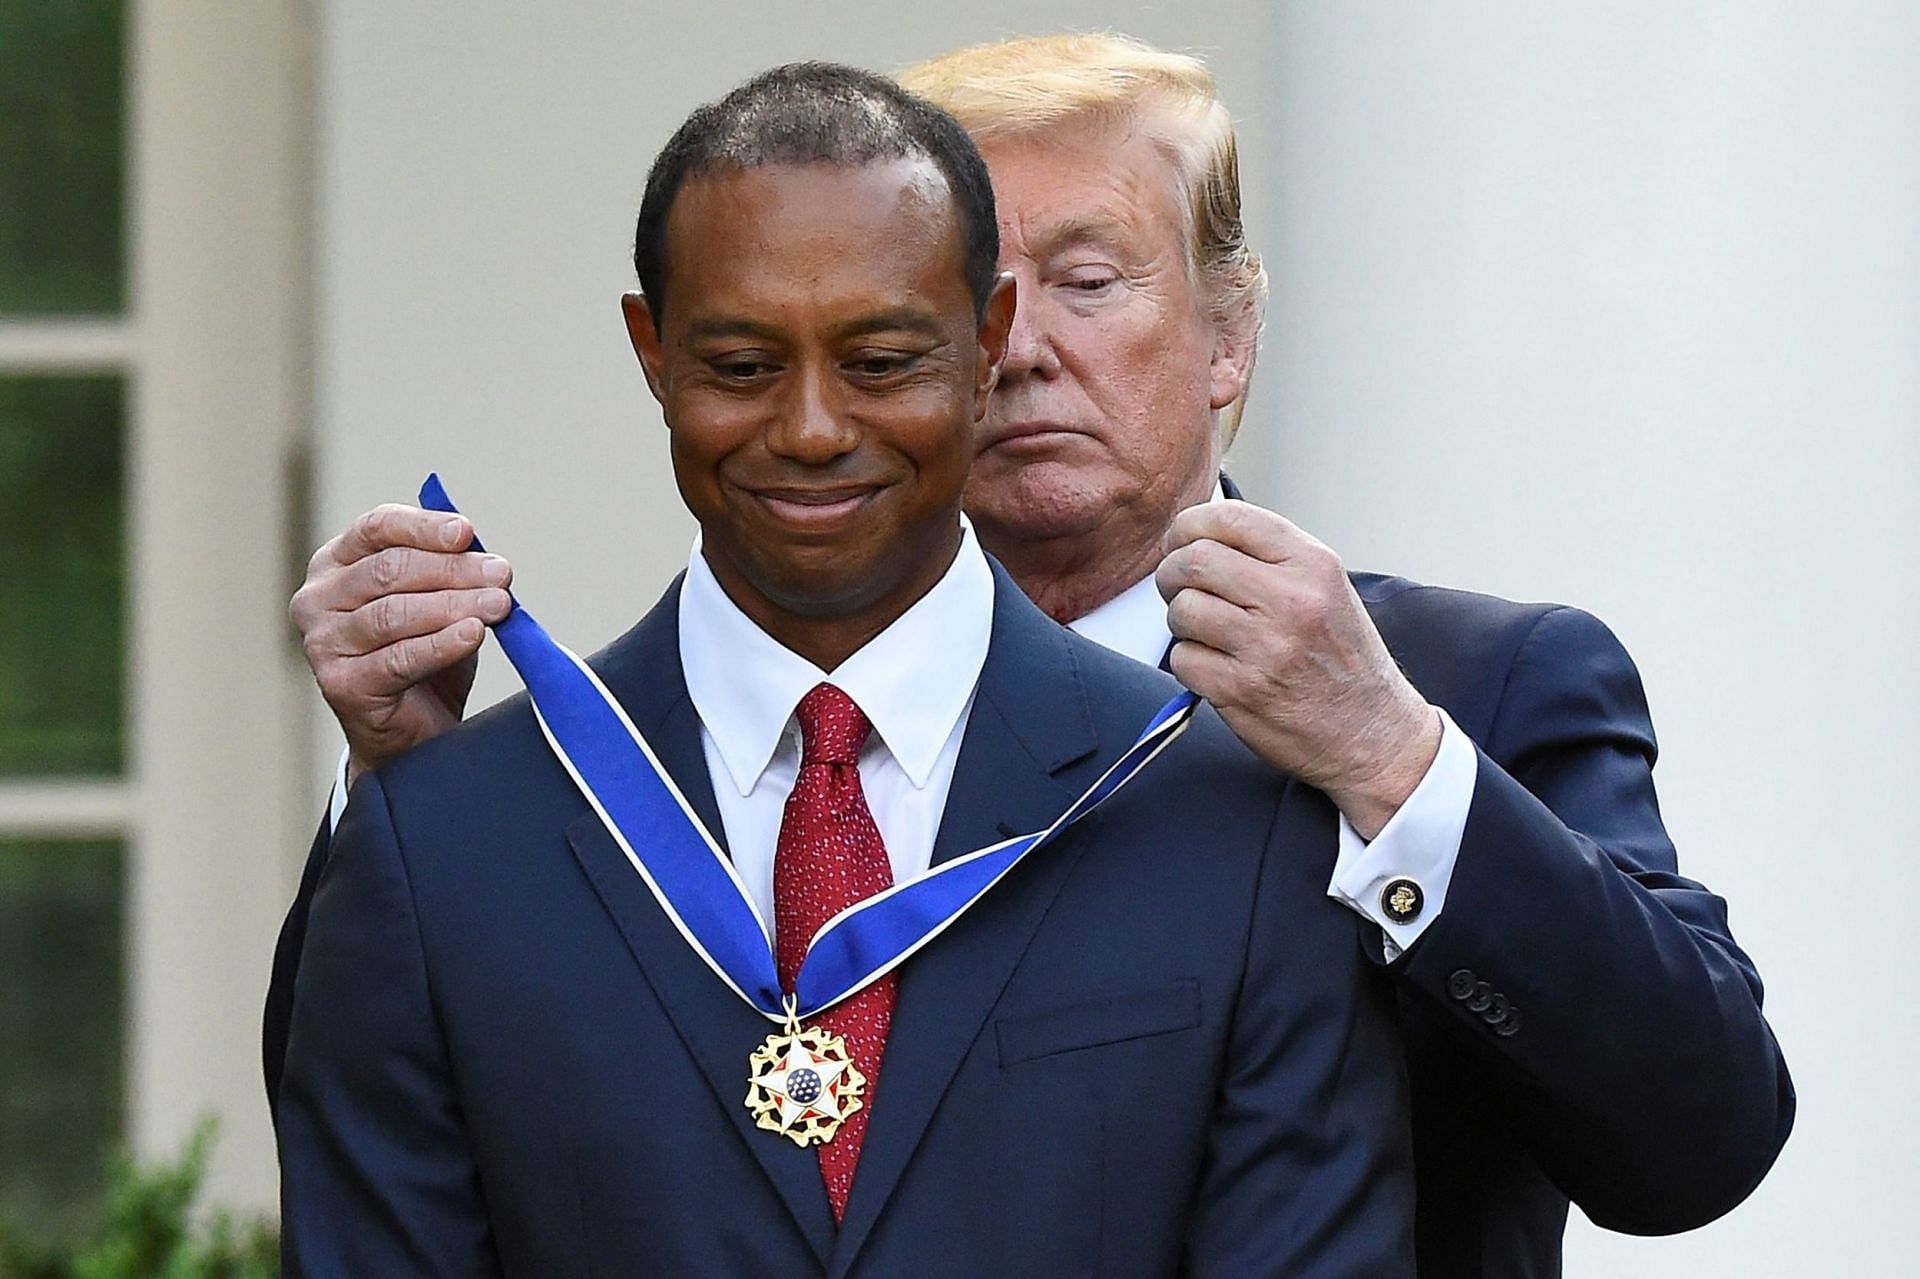 Woods received the Presidential Medal of Freedom from then President Trump in 2019 (Image via Reuters)